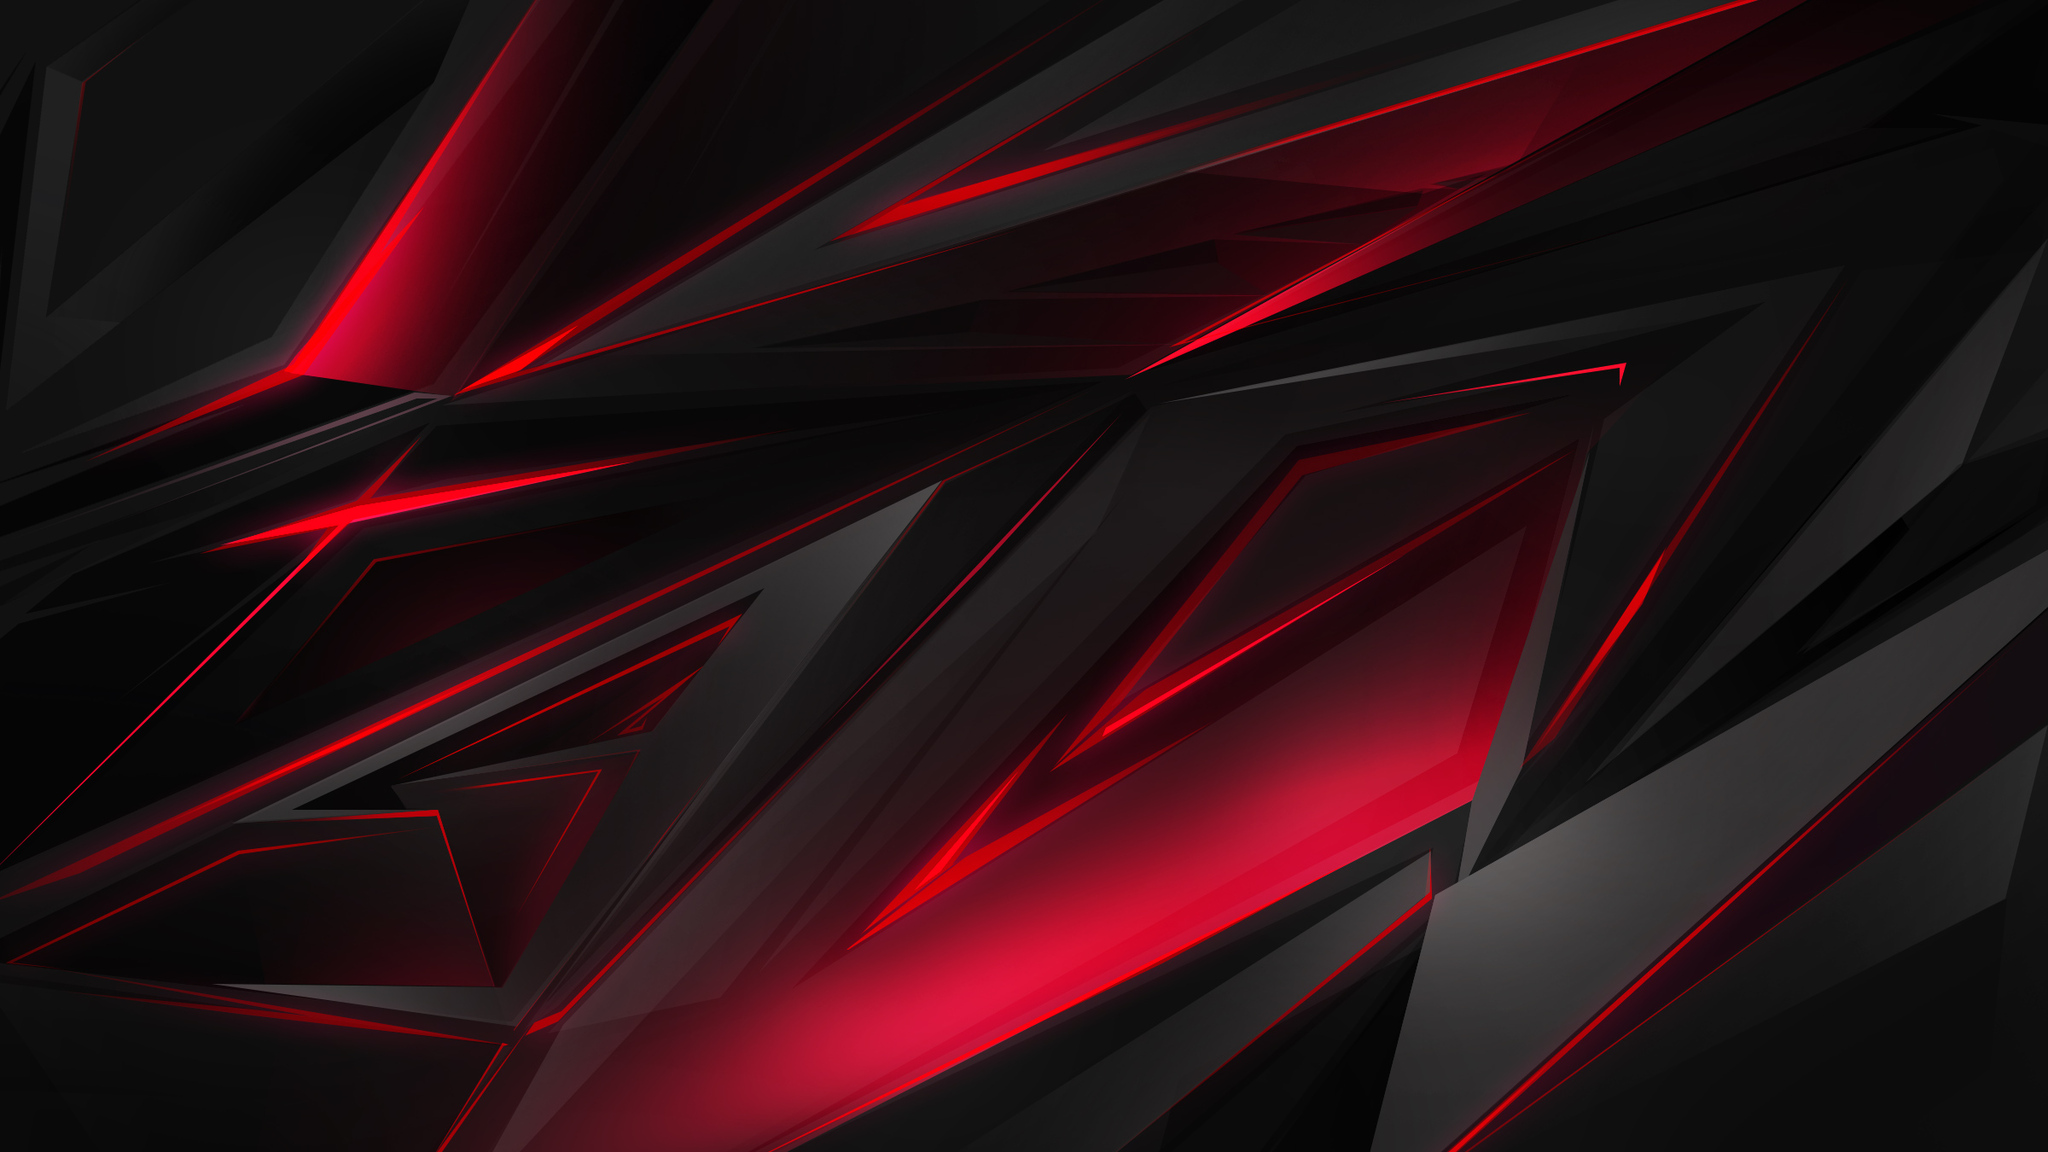 2048x1152 Polygonal Abstract Red Dark Background 2048x1152 Resolution